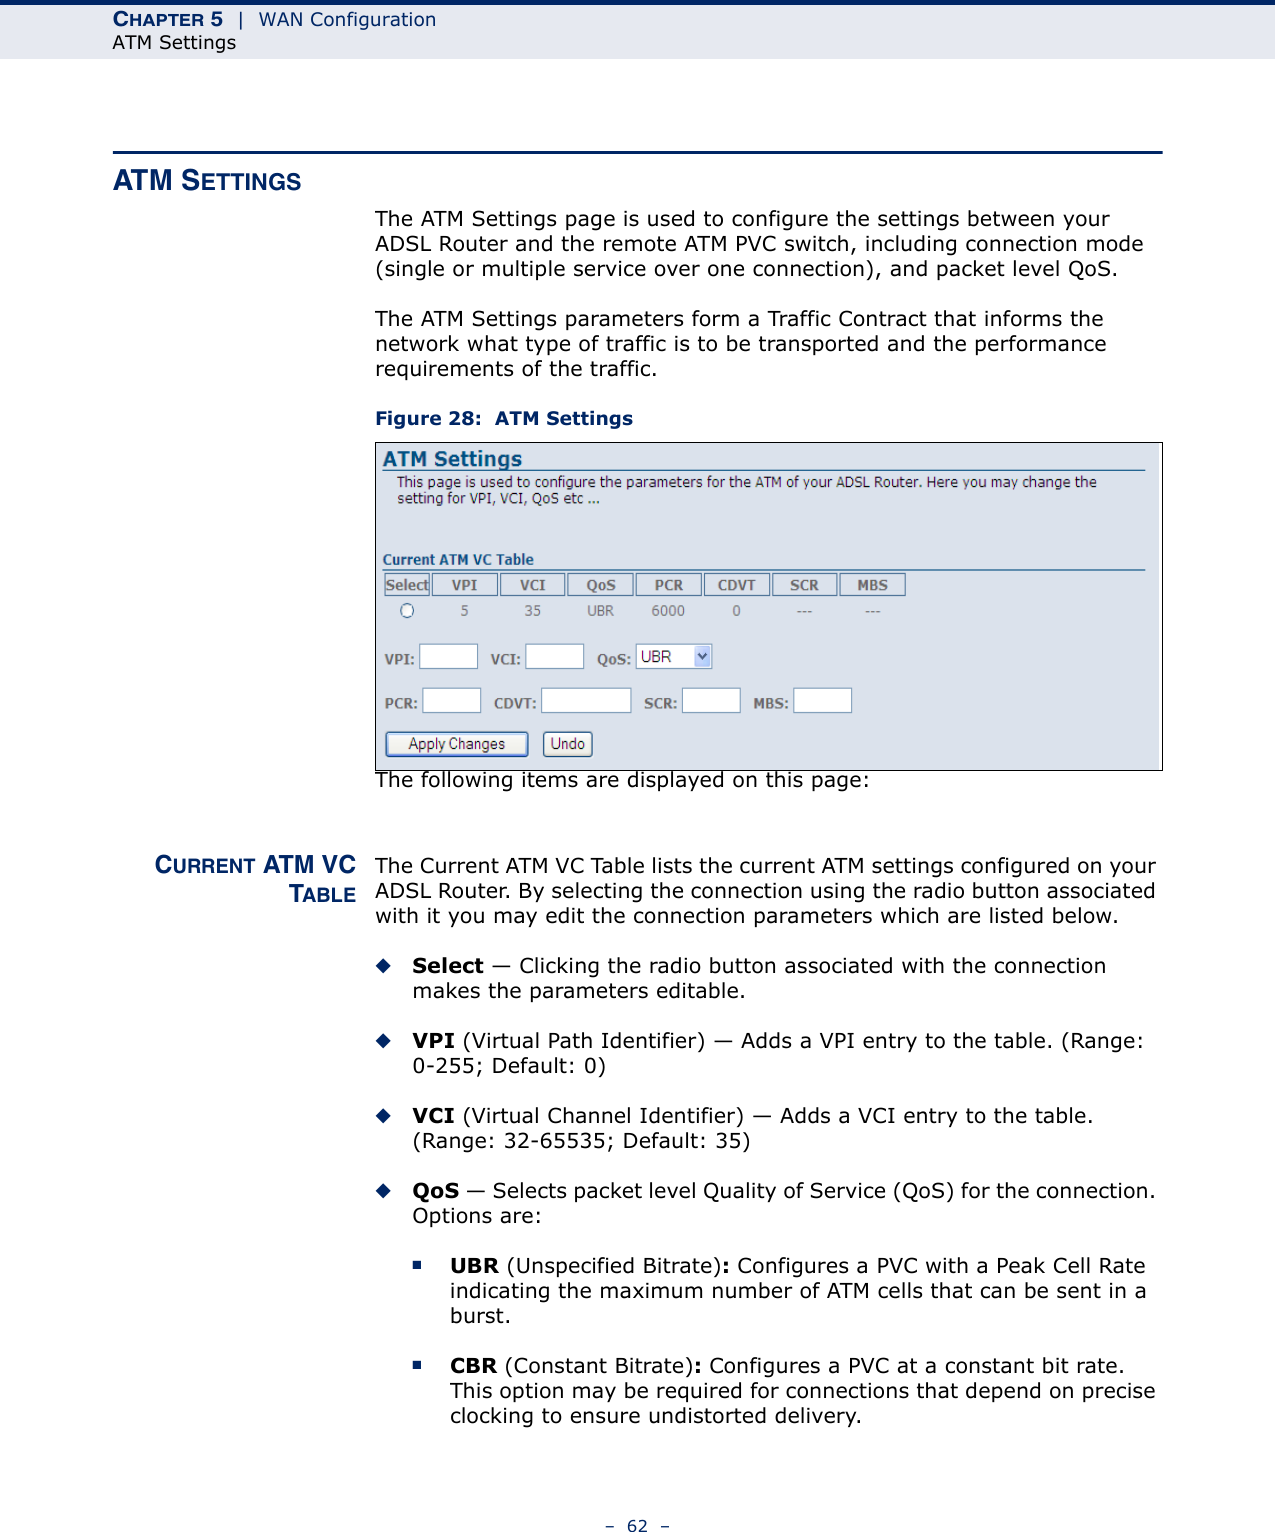 CHAPTER 5  |  WAN ConfigurationATM Settings–  62  –ATM SETTINGSThe ATM Settings page is used to configure the settings between your ADSL Router and the remote ATM PVC switch, including connection mode (single or multiple service over one connection), and packet level QoS. The ATM Settings parameters form a Traffic Contract that informs the network what type of traffic is to be transported and the performance requirements of the traffic.Figure 28:  ATM SettingsThe following items are displayed on this page:CURRENT ATM VCTABLEThe Current ATM VC Table lists the current ATM settings configured on your ADSL Router. By selecting the connection using the radio button associated with it you may edit the connection parameters which are listed below.◆Select — Clicking the radio button associated with the connection makes the parameters editable.◆VPI (Virtual Path Identifier) — Adds a VPI entry to the table. (Range: 0-255; Default: 0)◆VCI (Virtual Channel Identifier) — Adds a VCI entry to the table. (Range: 32-65535; Default: 35)◆QoS — Selects packet level Quality of Service (QoS) for the connection. Options are:■UBR (Unspecified Bitrate): Configures a PVC with a Peak Cell Rate indicating the maximum number of ATM cells that can be sent in a burst.■CBR (Constant Bitrate): Configures a PVC at a constant bit rate. This option may be required for connections that depend on precise clocking to ensure undistorted delivery.